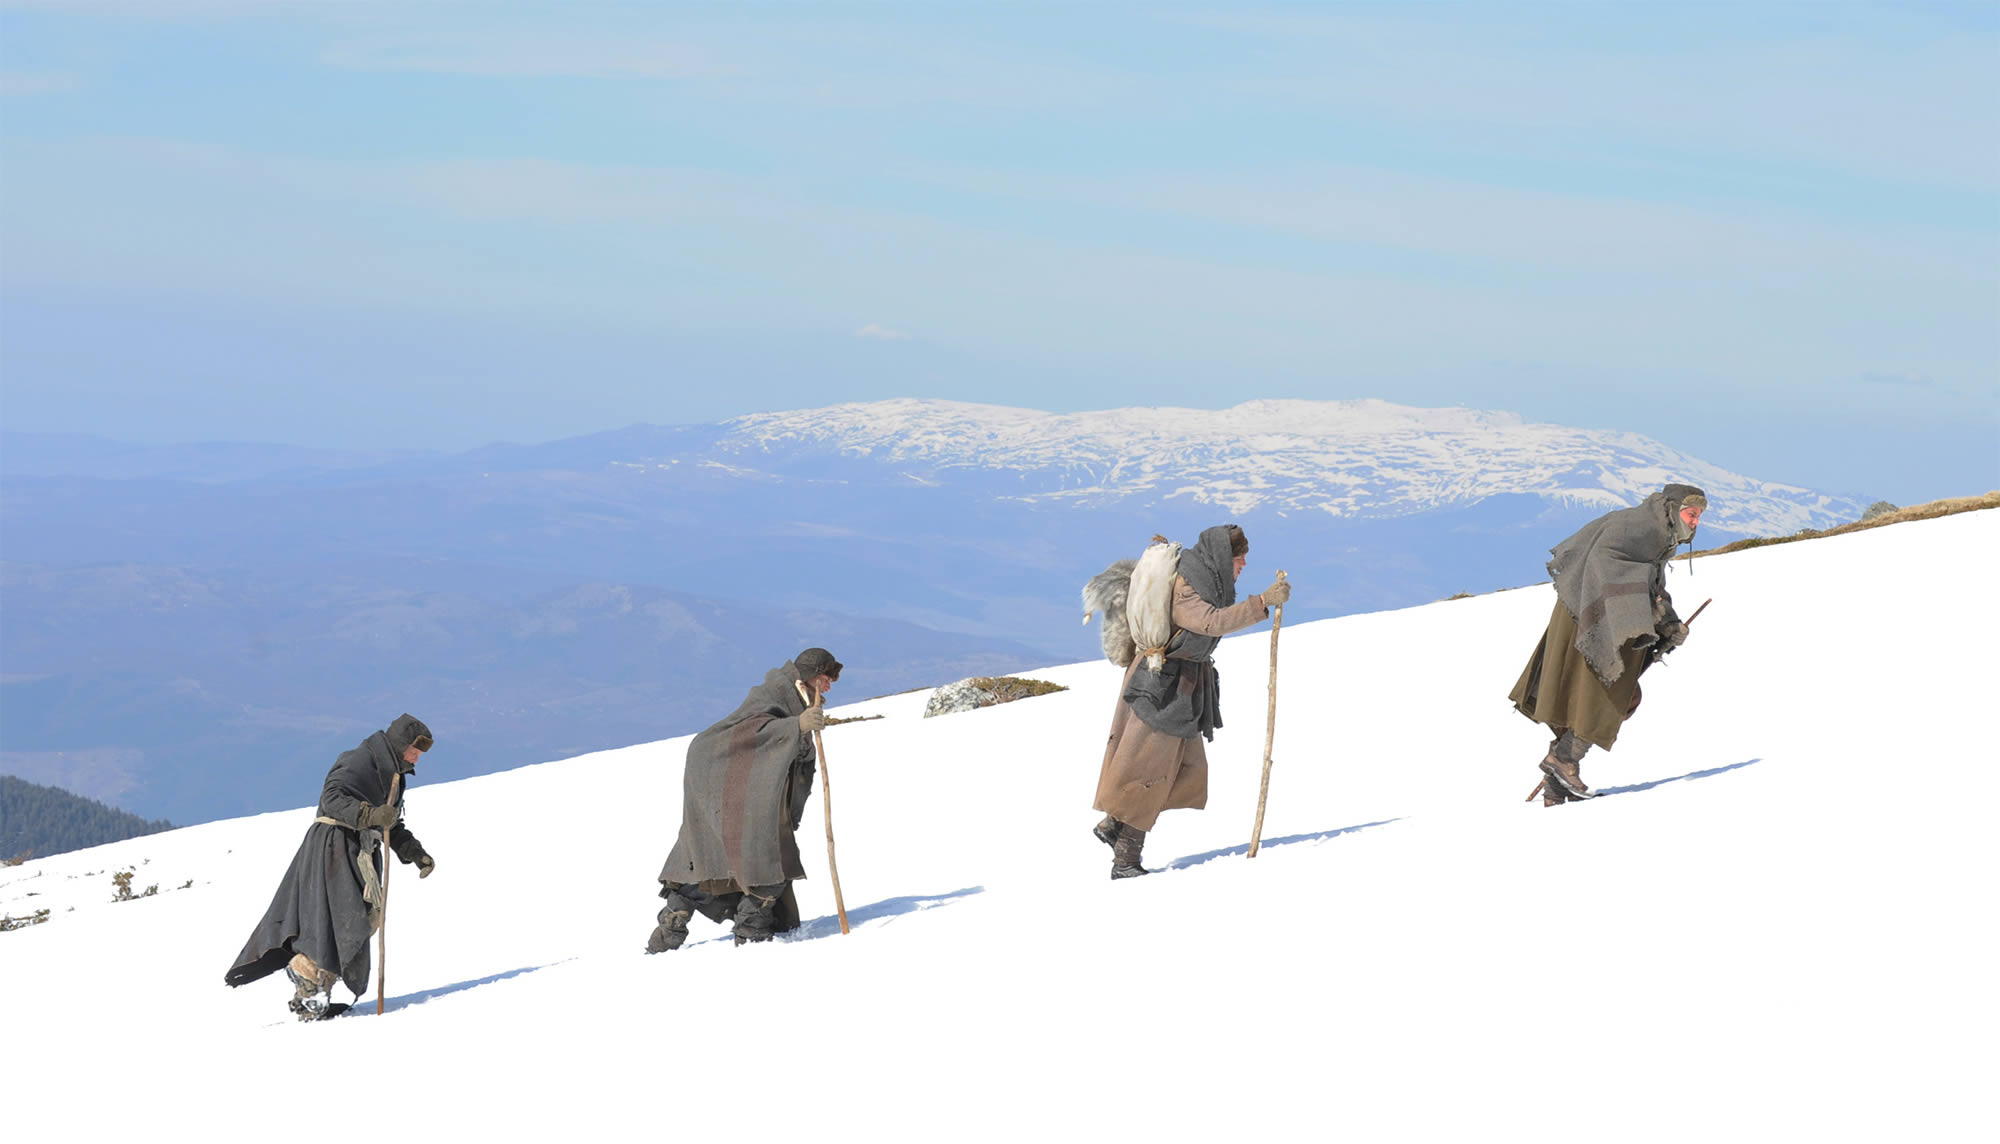 The way back, men hiking up a snowy moutain